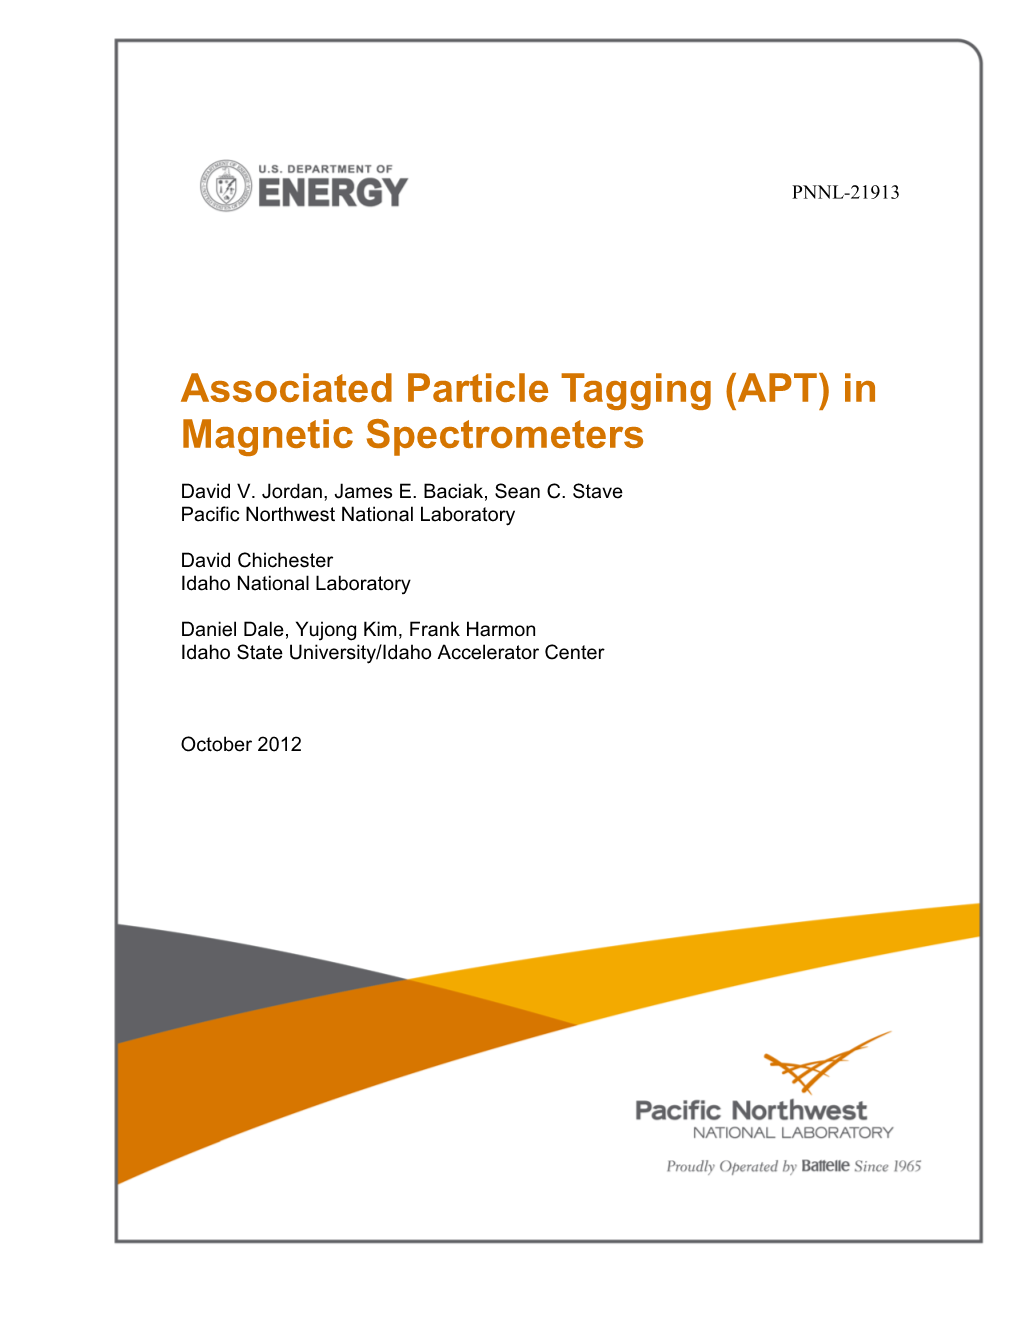 Associated Particle Tagging (APT) in Magnetic Spectrometers